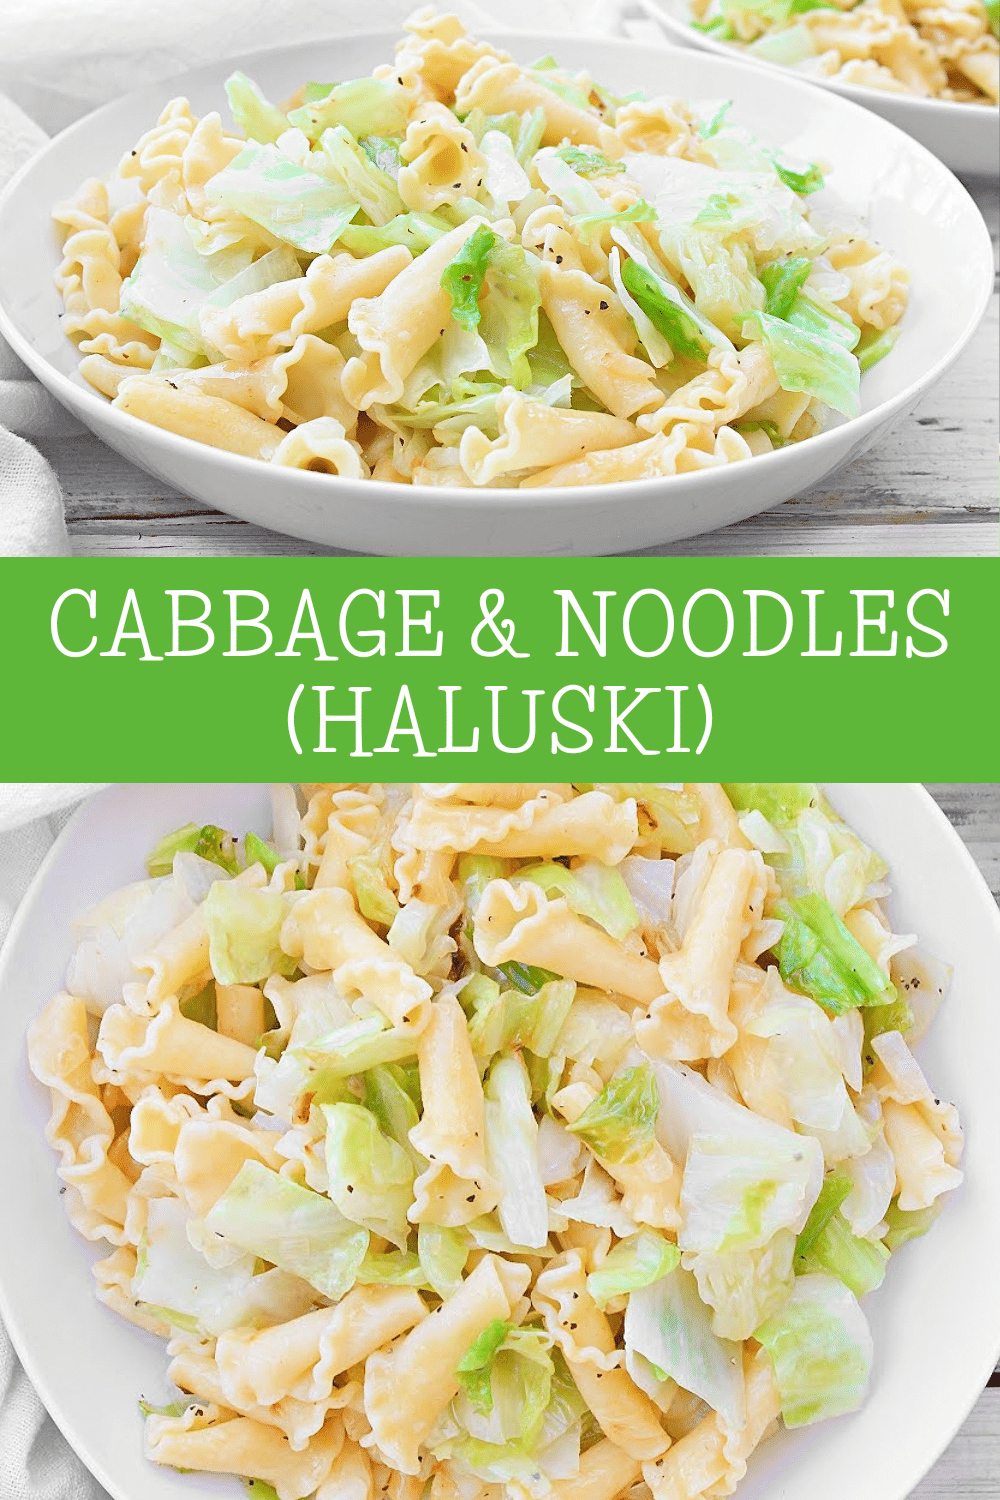 Cabbage and Noodles (Haluski) ~ This traditional Hungarian and Polish comfort food dish, also known as Pennsylvania Haluski, is easy to make with budget-friendly ingredients. So simple and satisfying! via @thiswifecooks